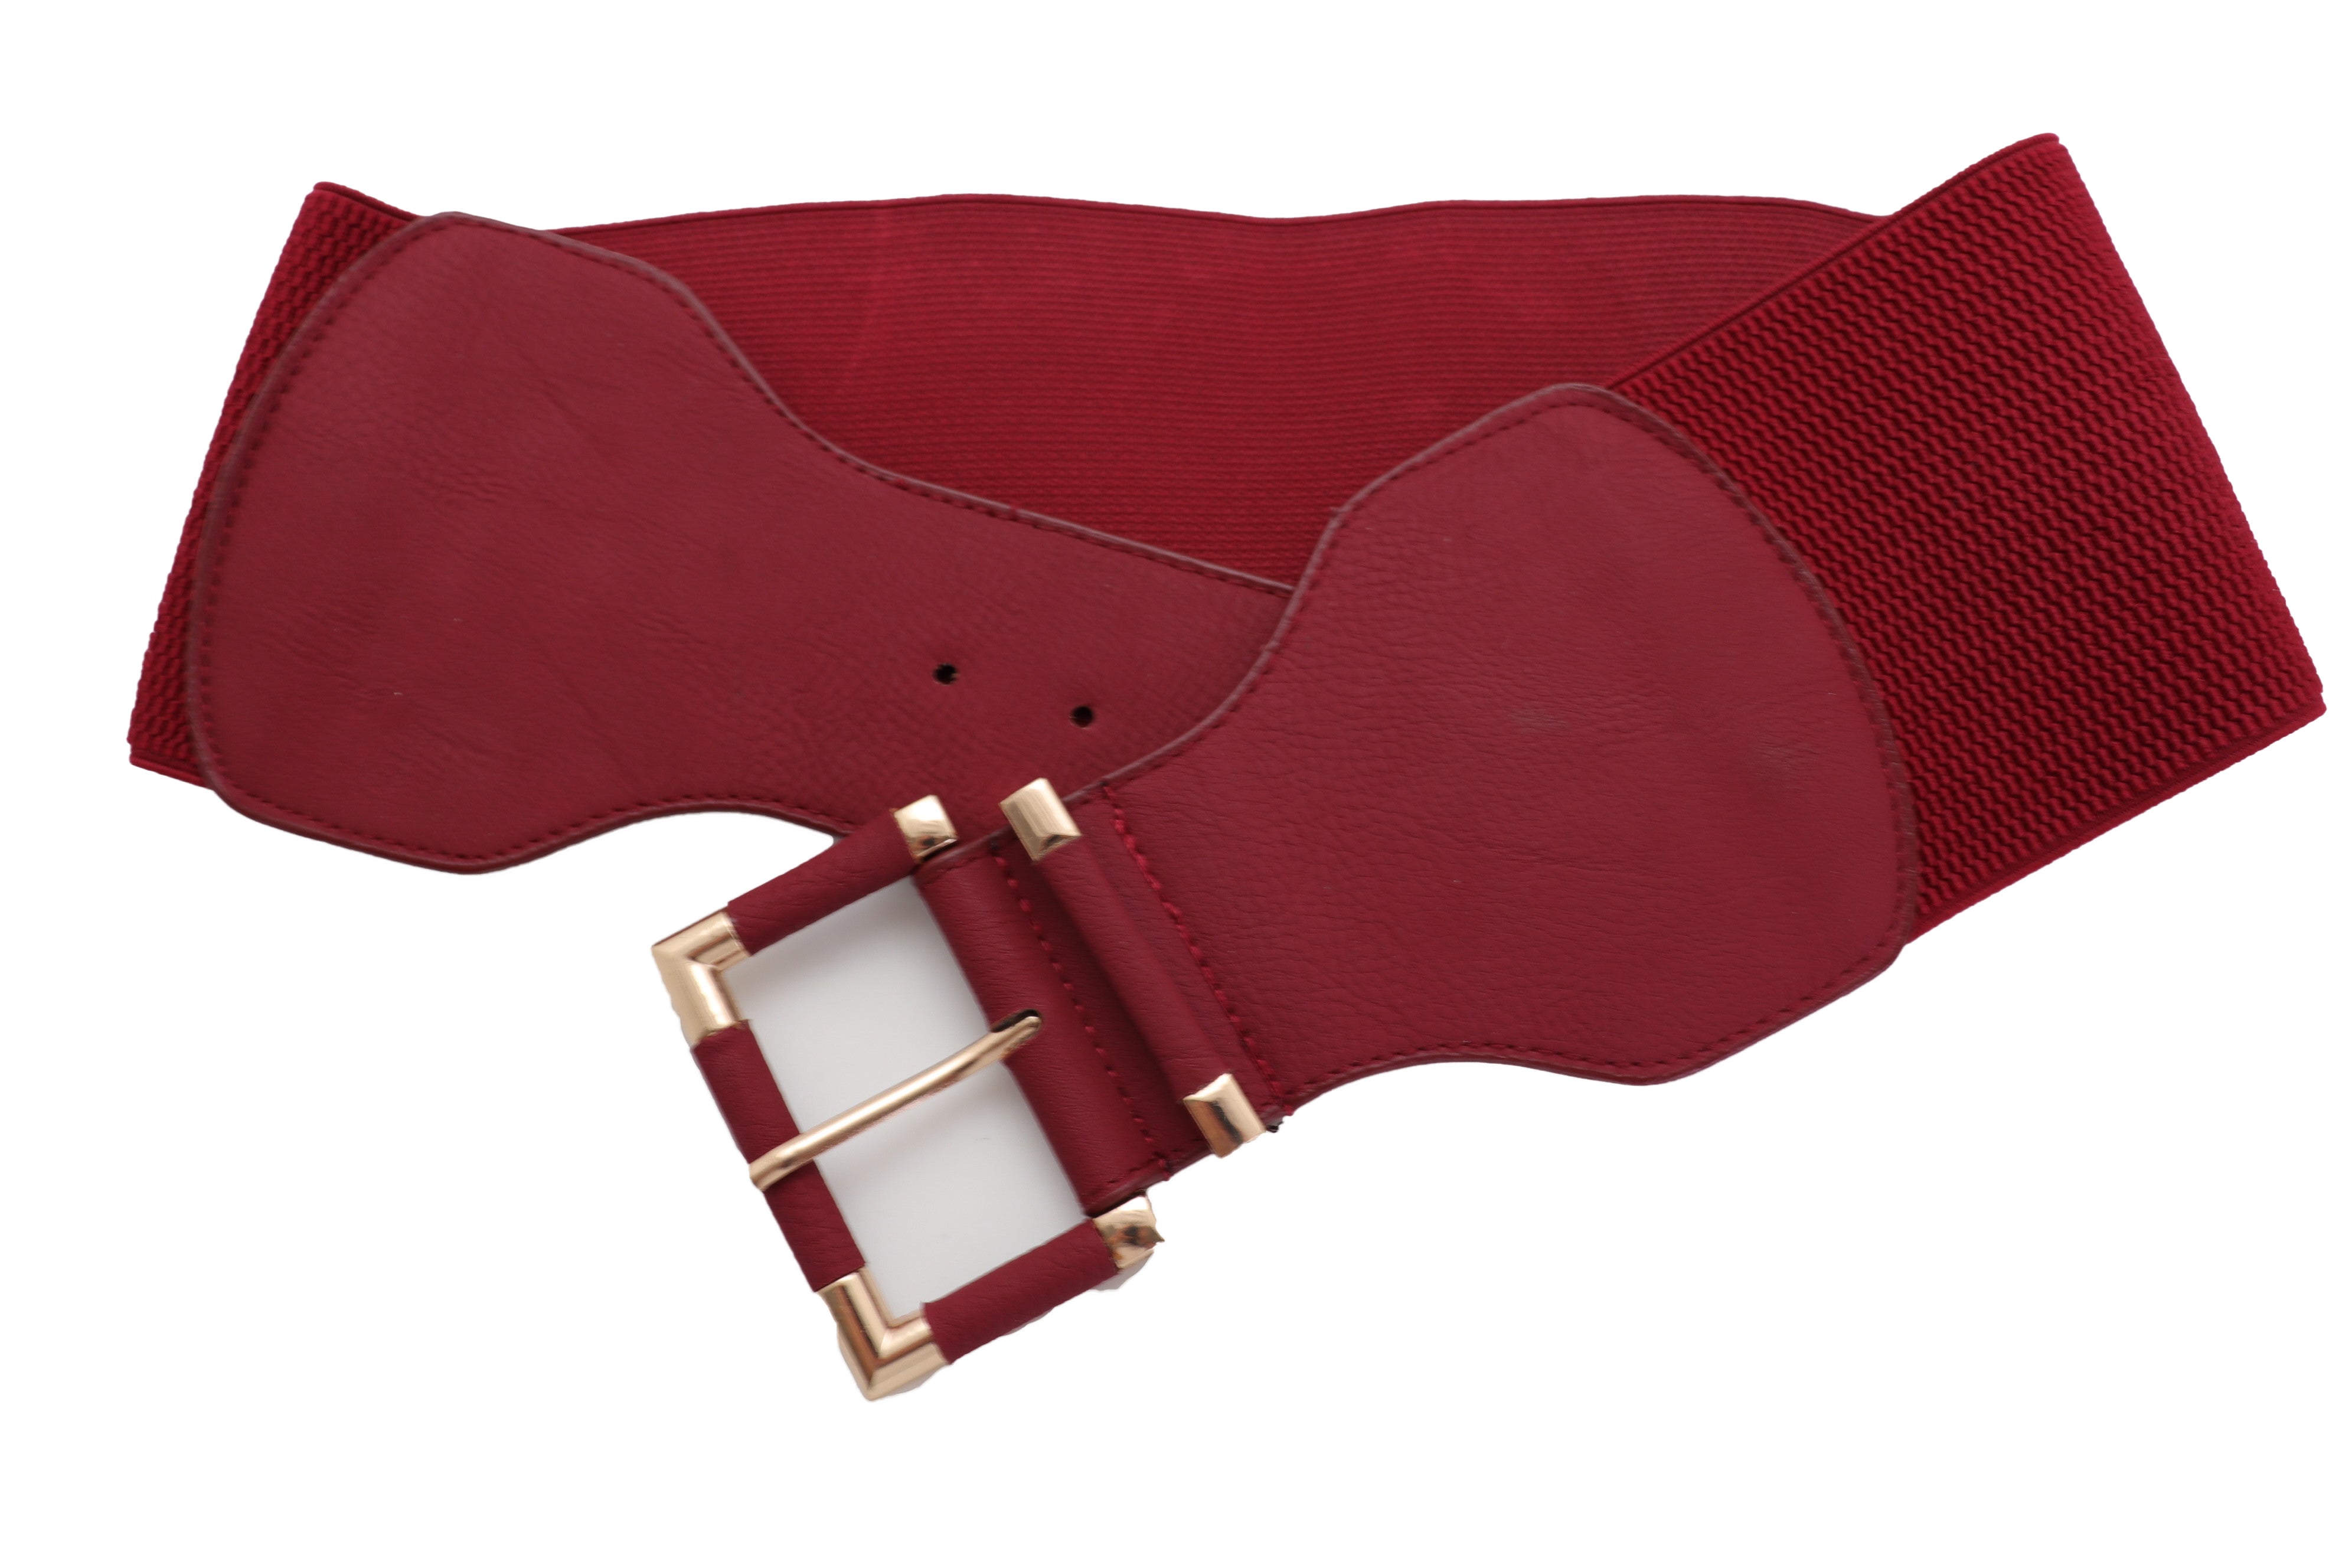 Oxblood Red Belt Red and Grey Belt Leather and Elastic Belt 